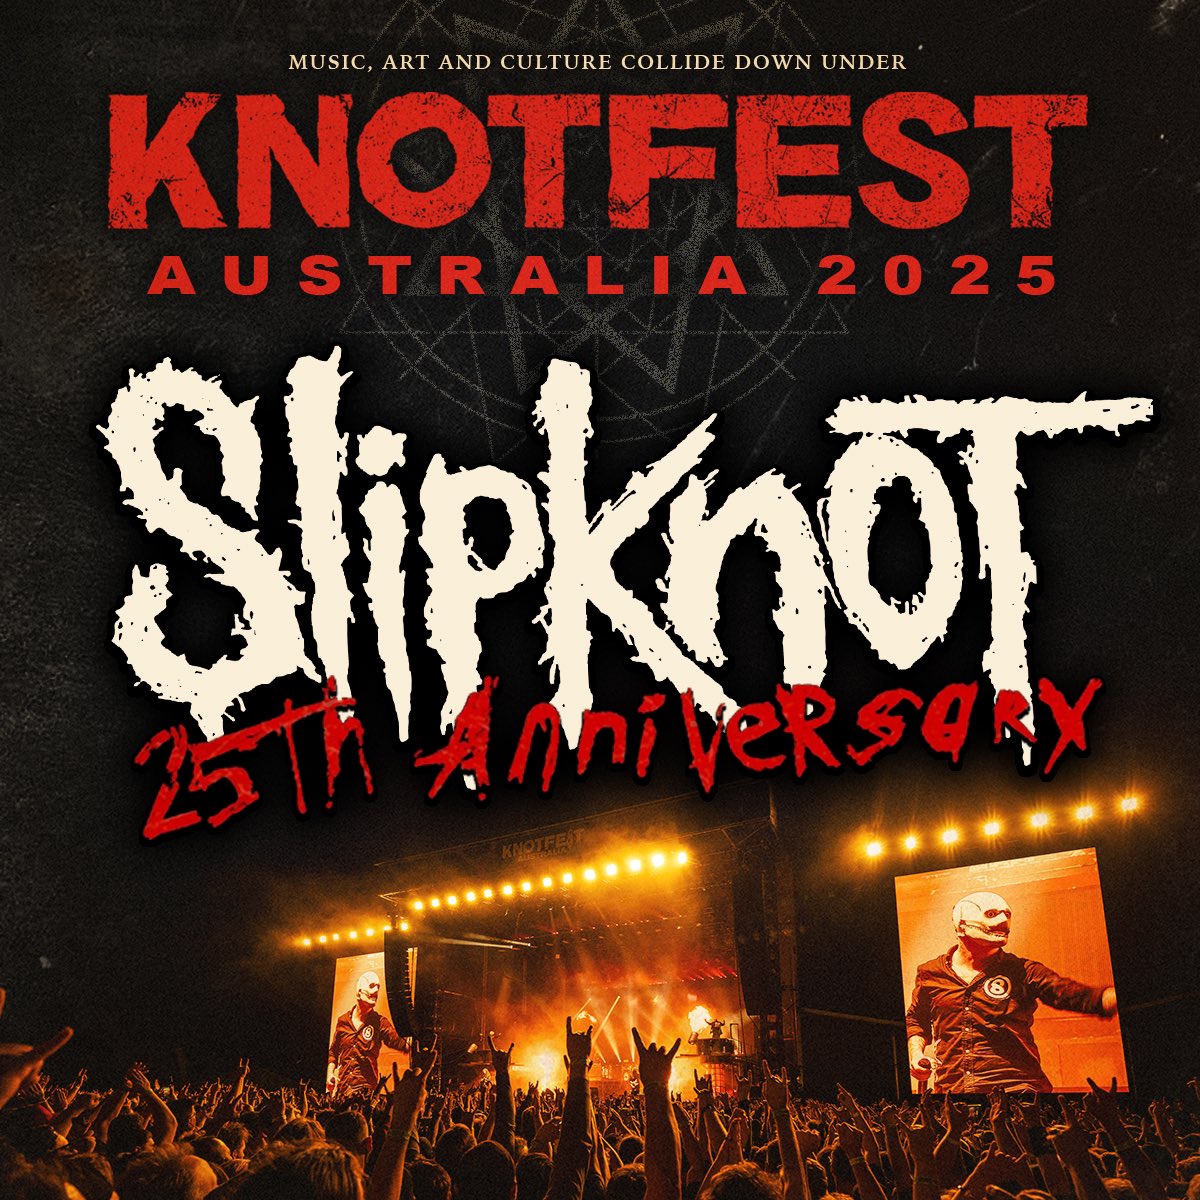 See you in 2025 🇦🇺 To secure first access before any other presale, get your tickets now for 2024 and join our friends @Pantera, @Disturbed, and @lambofgod next week at @KnotfestAu 2024. knotfest.com/australia